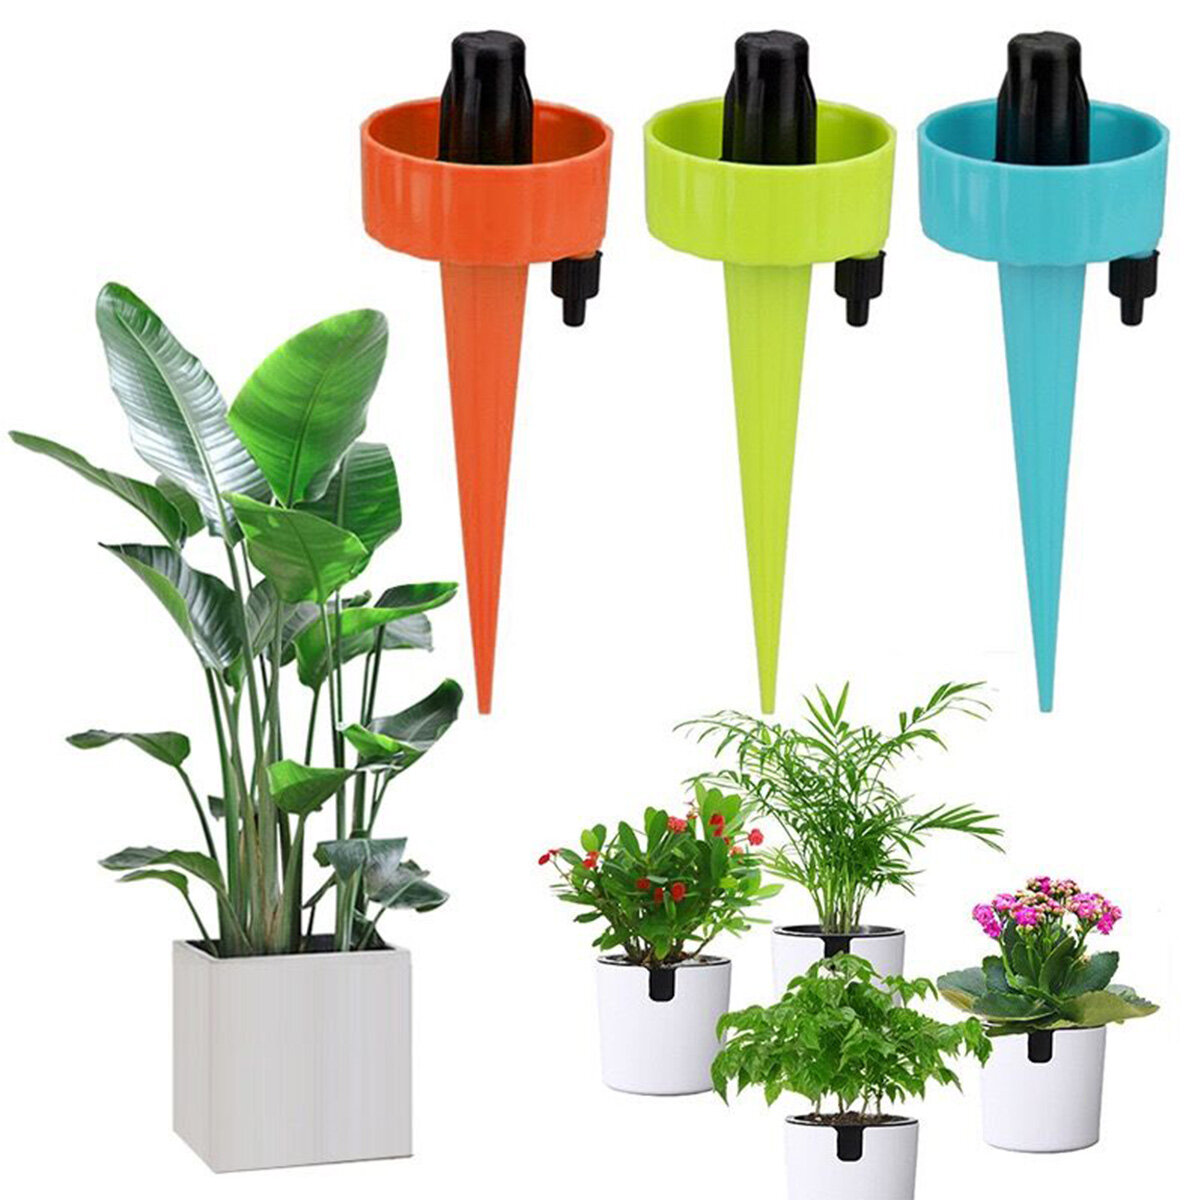 Youngshion Indoor Outdoor Automatic Plant Waterer Flower Self Watering Spikes Device Drip Irrigation System